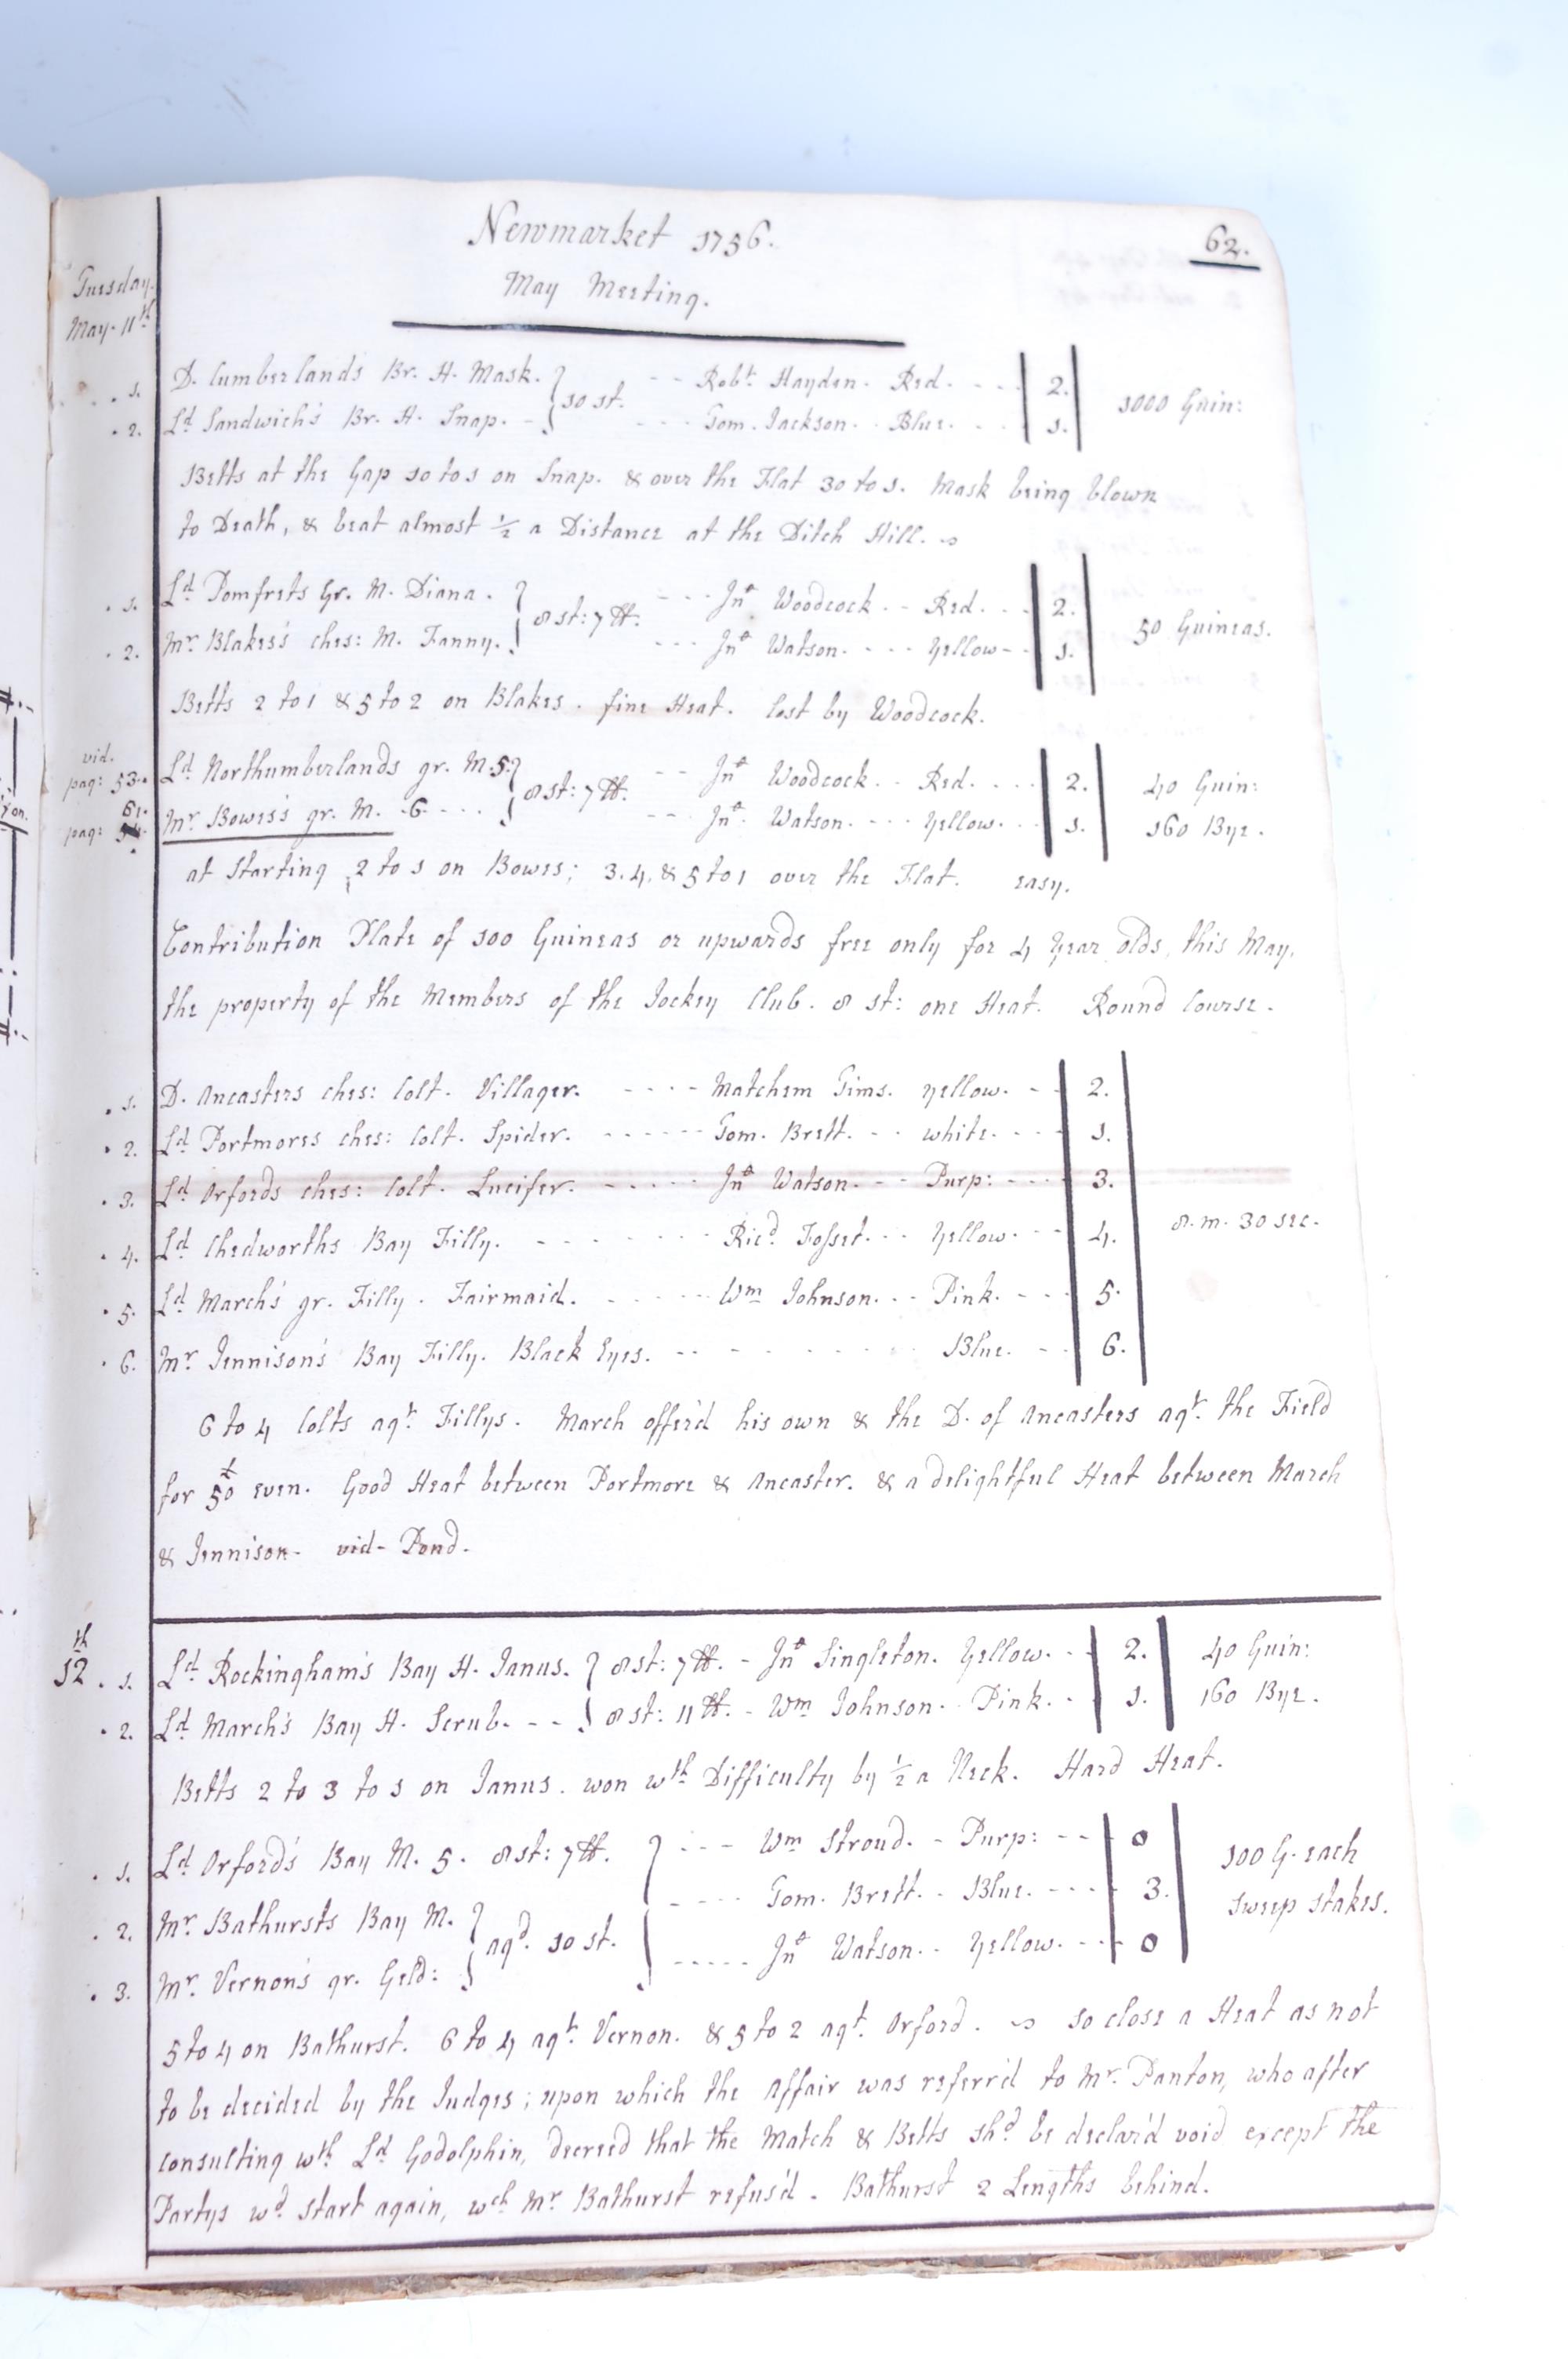 Newmarket Races, 18th century hand written ledgers showing all of the dates, meetings, runners and - Image 10 of 11